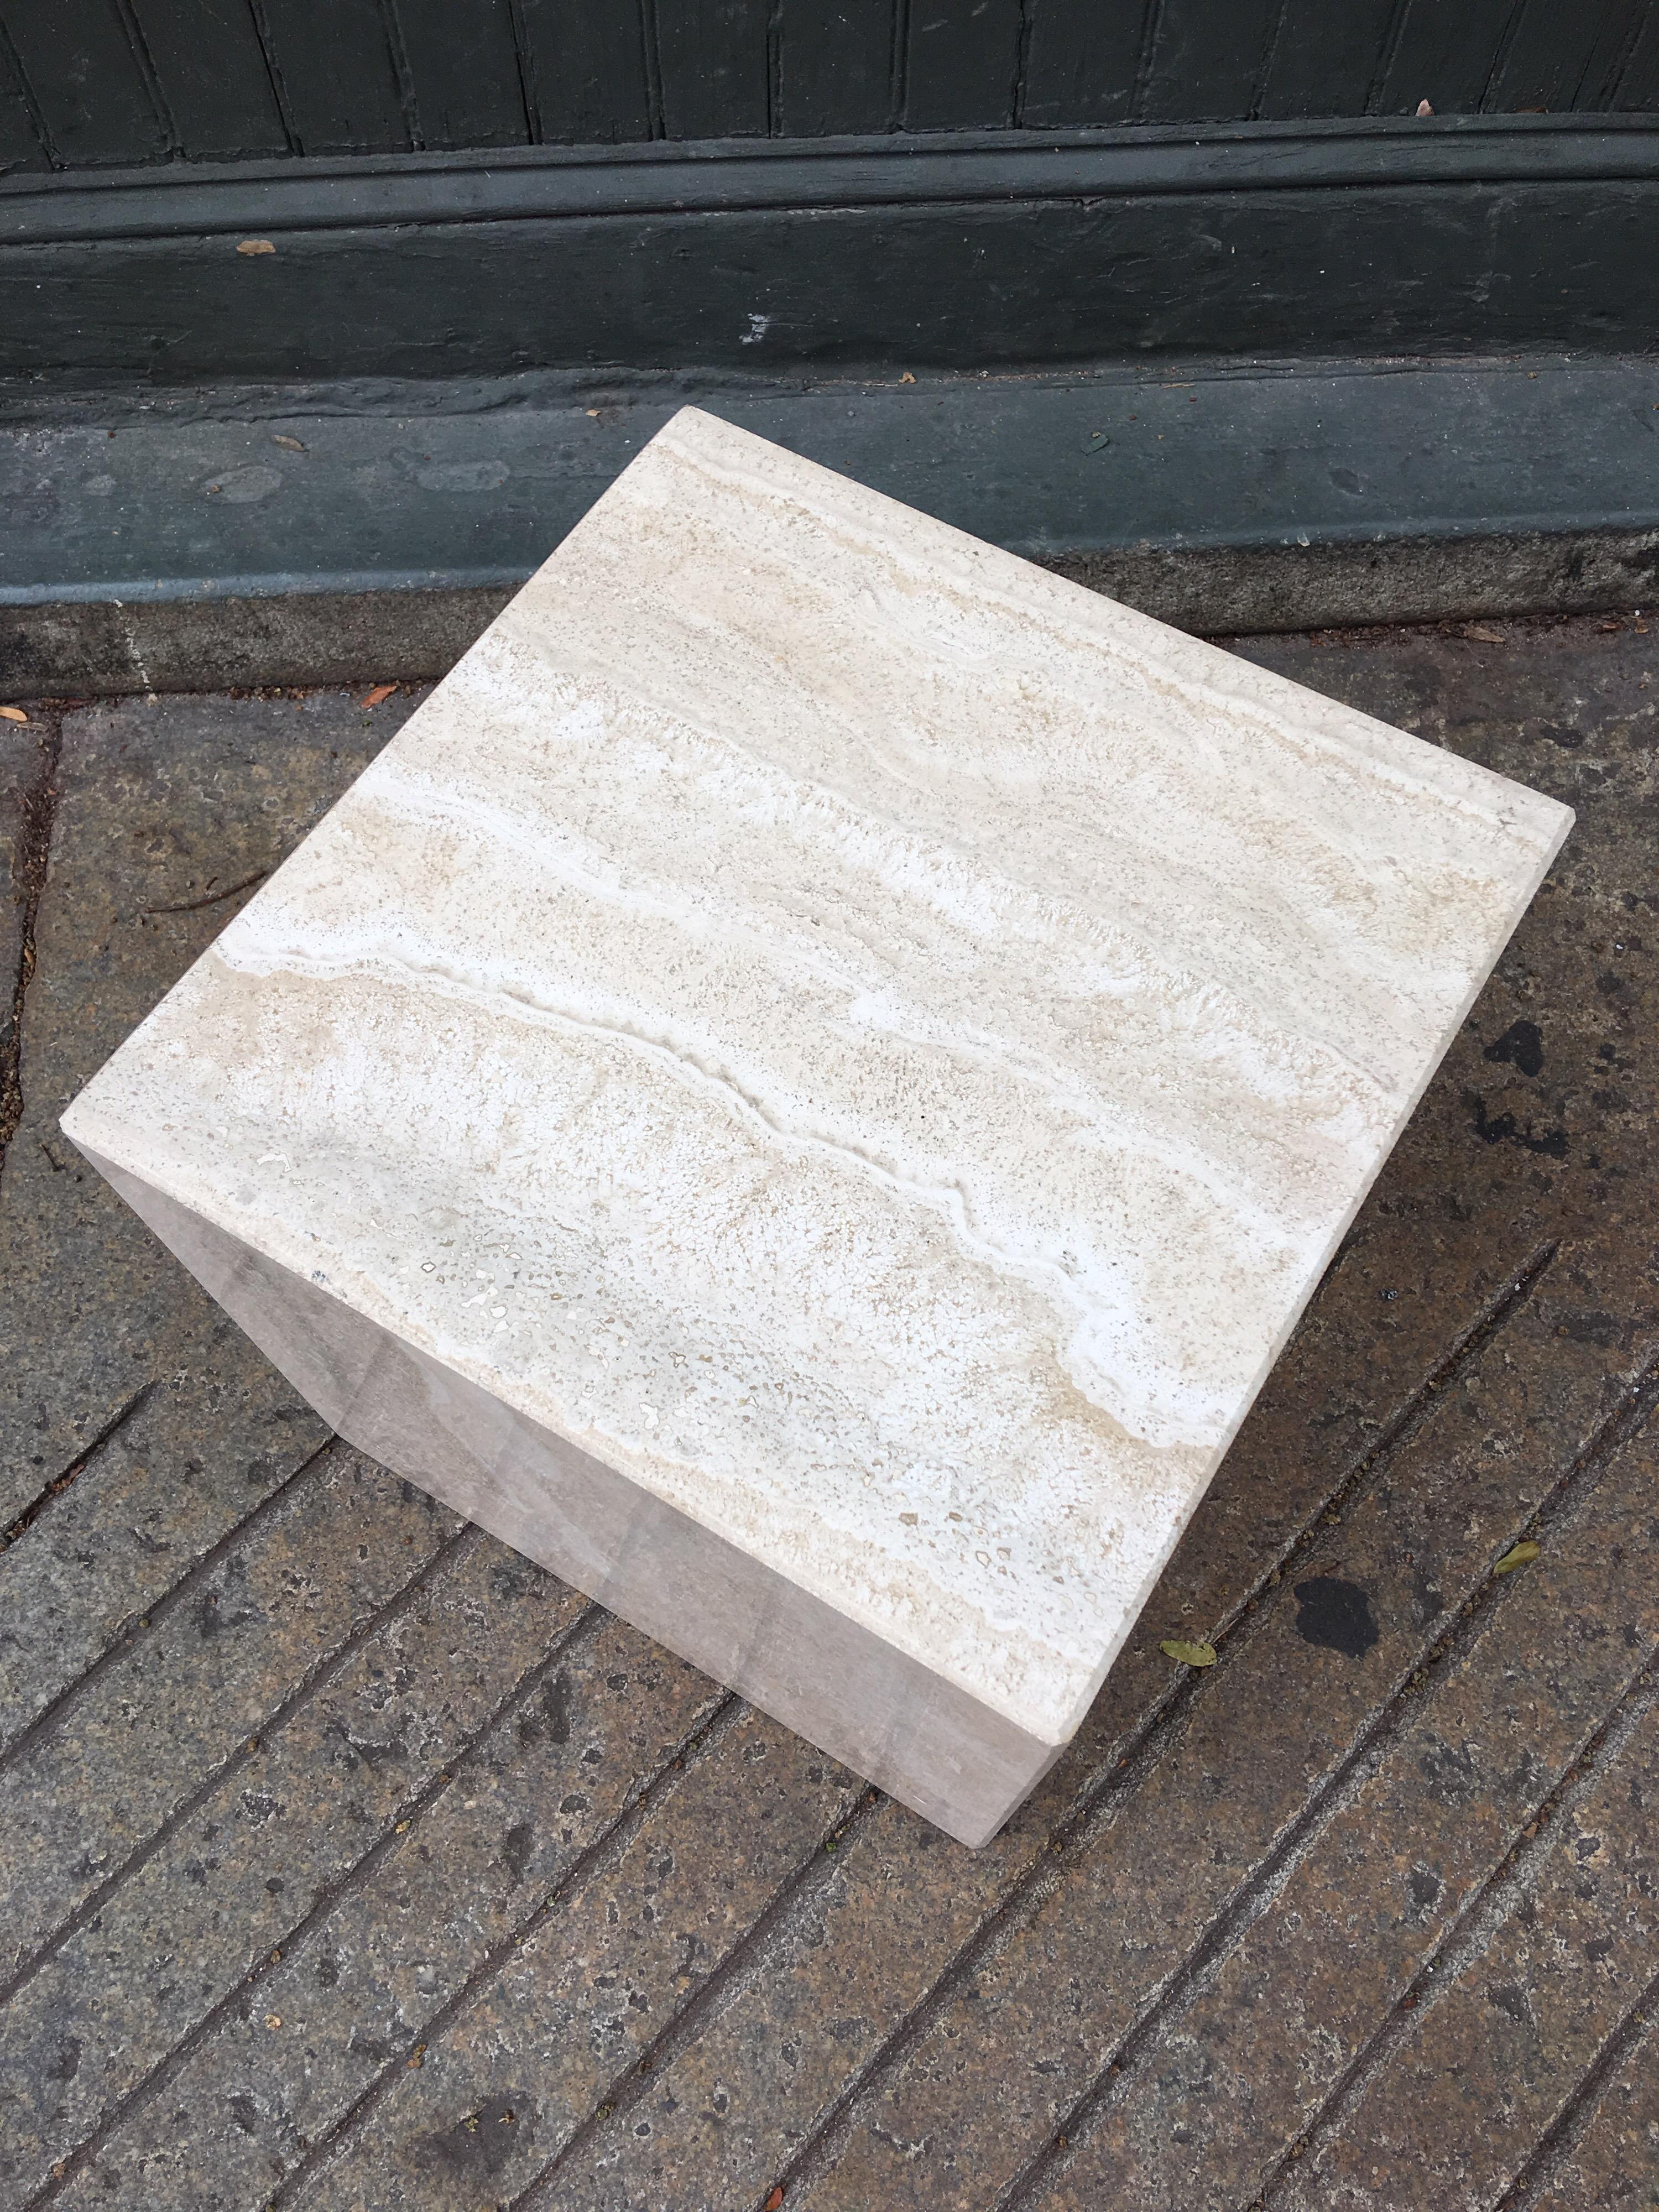 Nice square travertine cube, great to use as a side table or low stool.